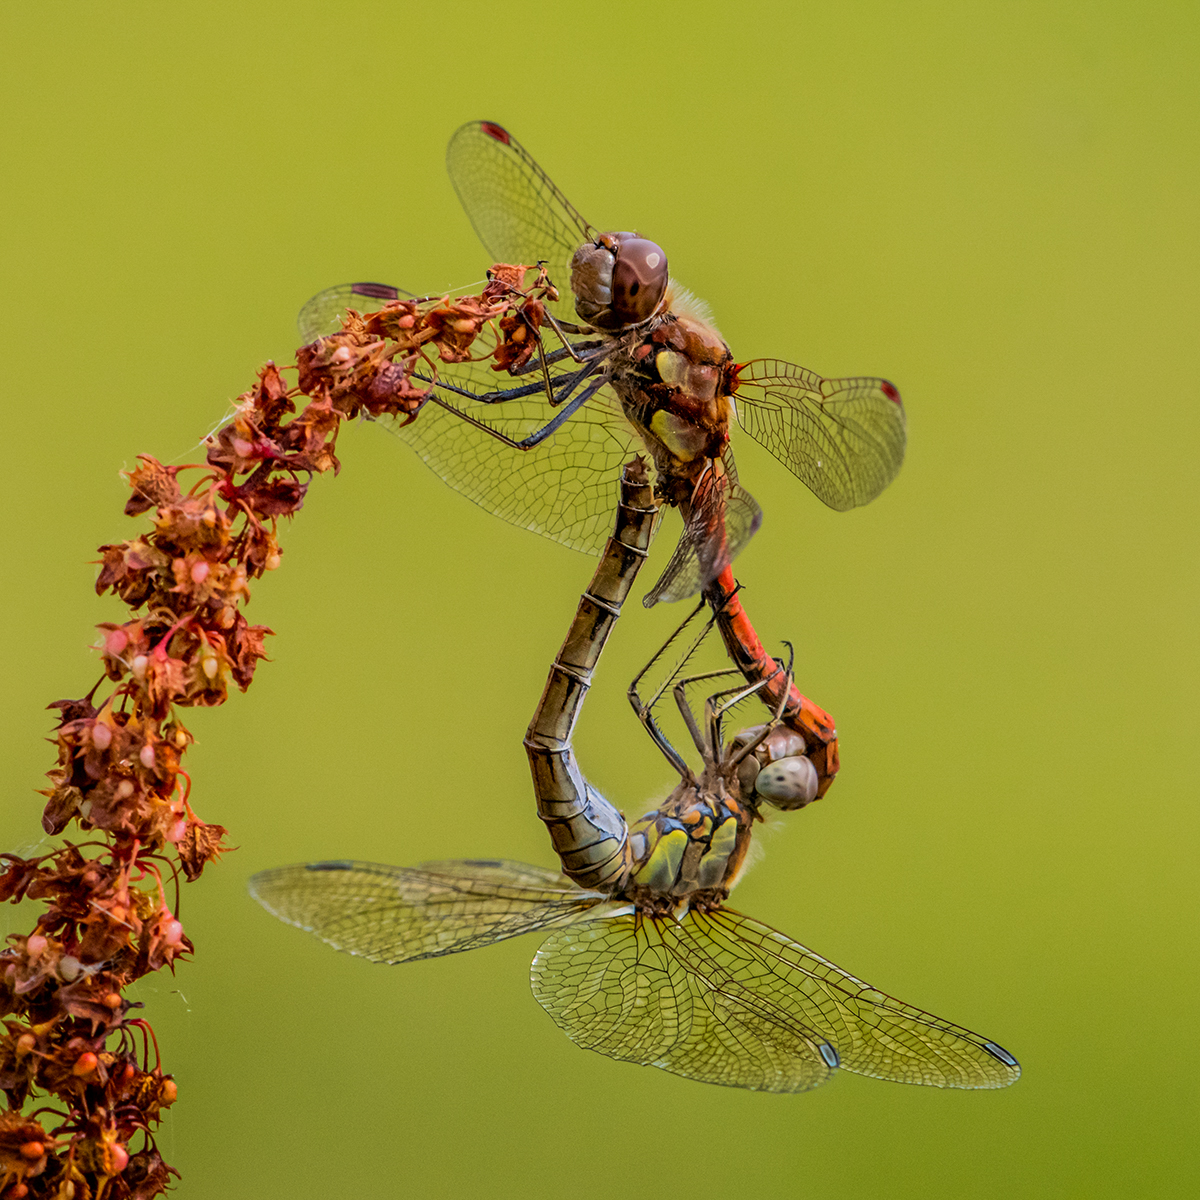 Mating Dragonflies by Simon Peters